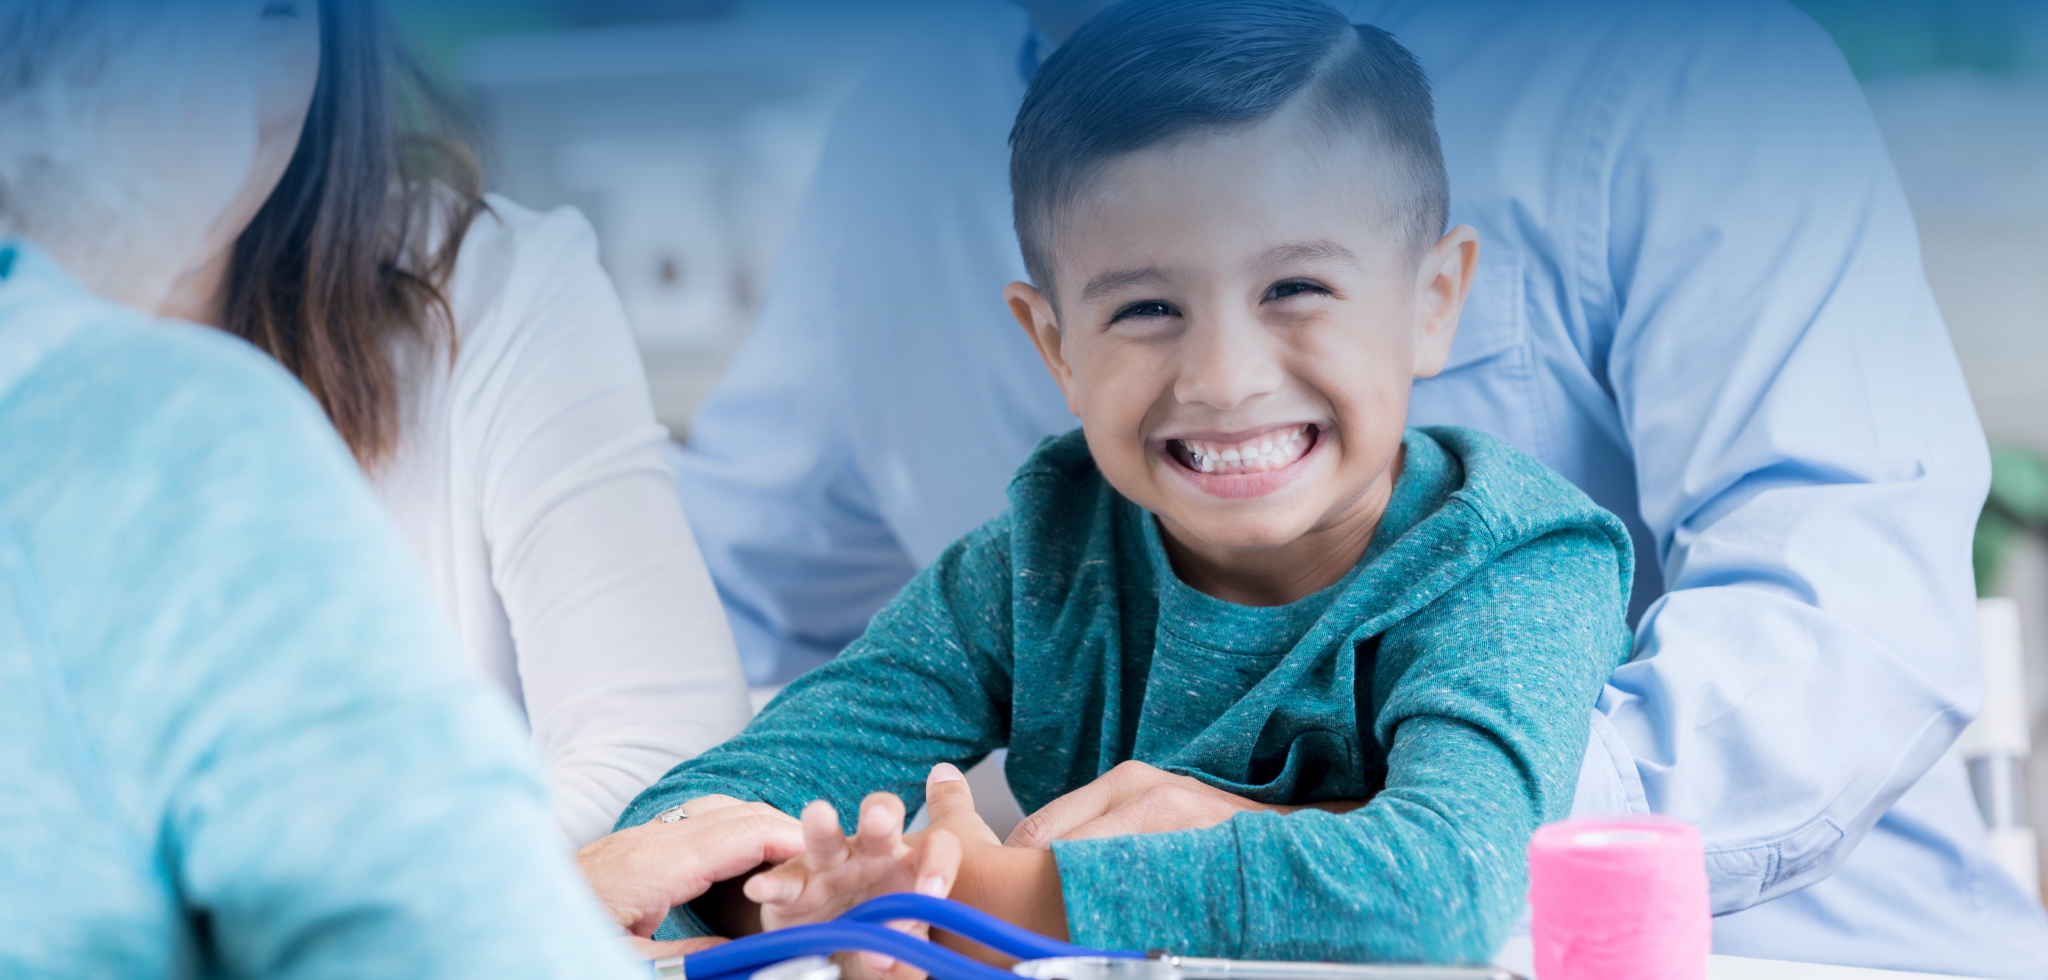 United Way health services, young boy smiling at the camera, child sitting at a doctors office with his parents, nurse speaking with child's parents